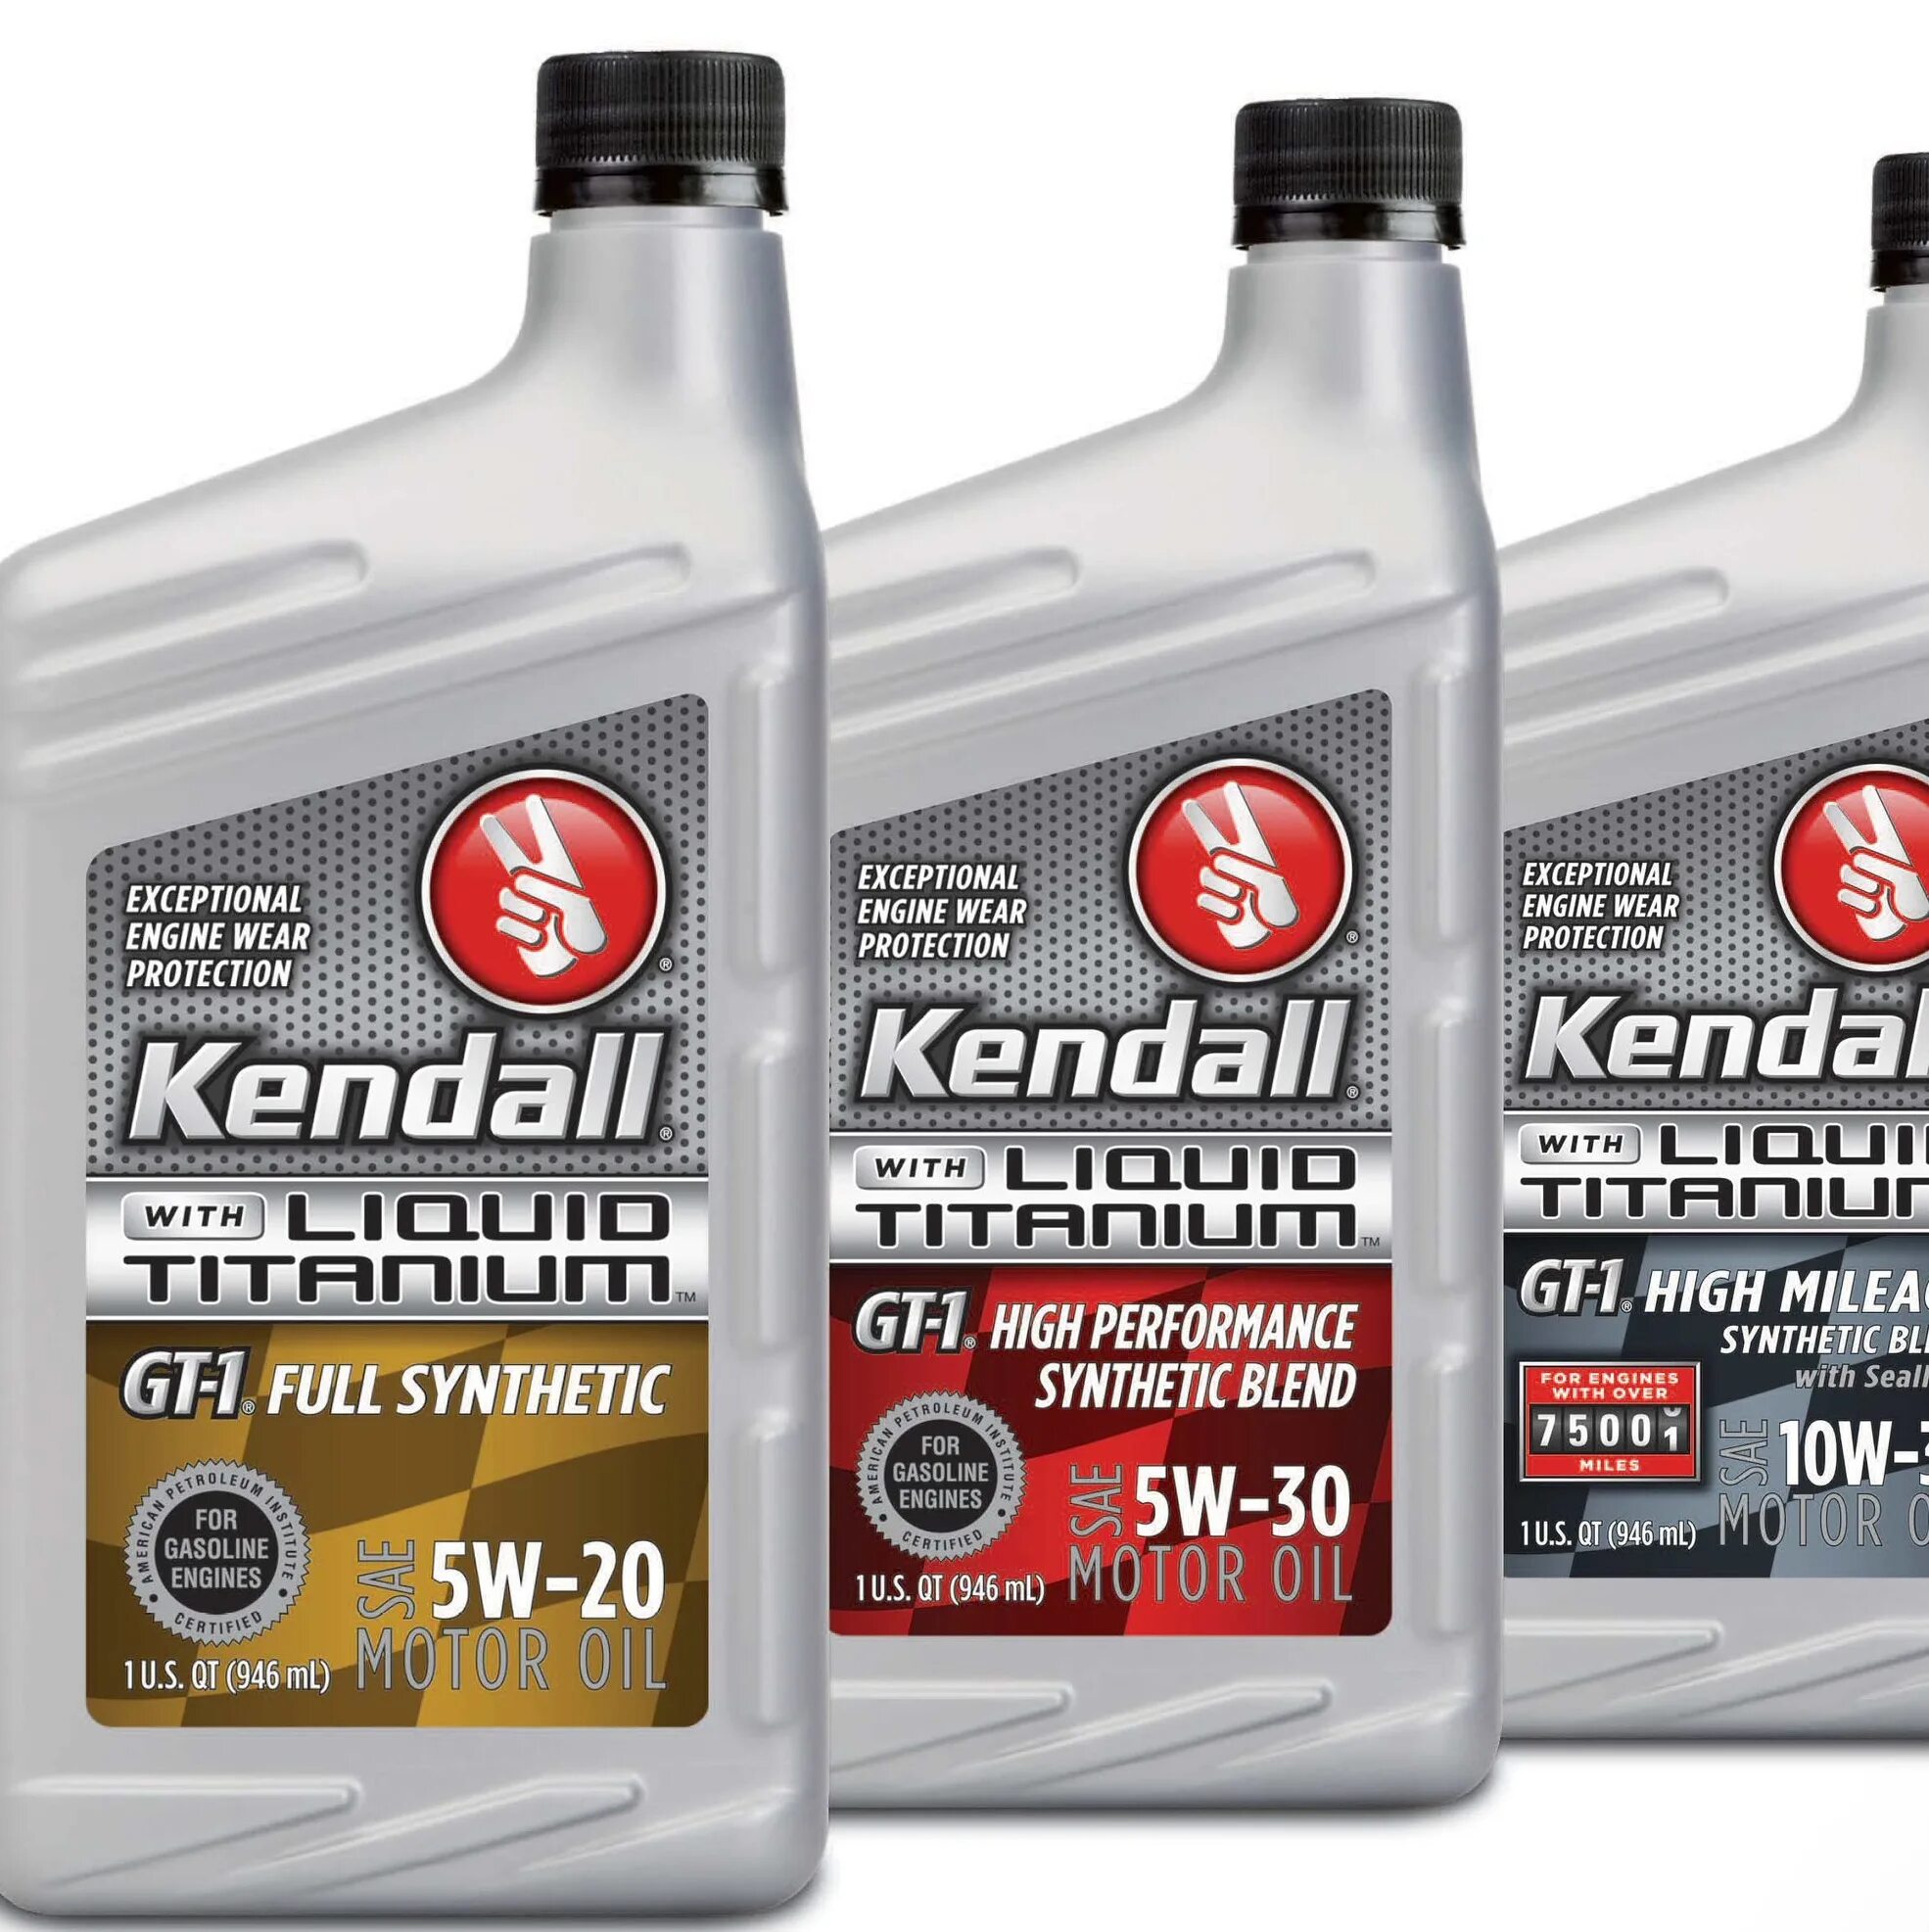 Моторное масло Kendall gt-1 5w30. Kendall gt-1 5w-20 High Performance Synthetic Blend Motor Oil with Liquid Titanium. Kendall gt-1 High Performance Synthetic Blend Liquid Titanium 5w-30. Масло Kendall 0w20 gt1.